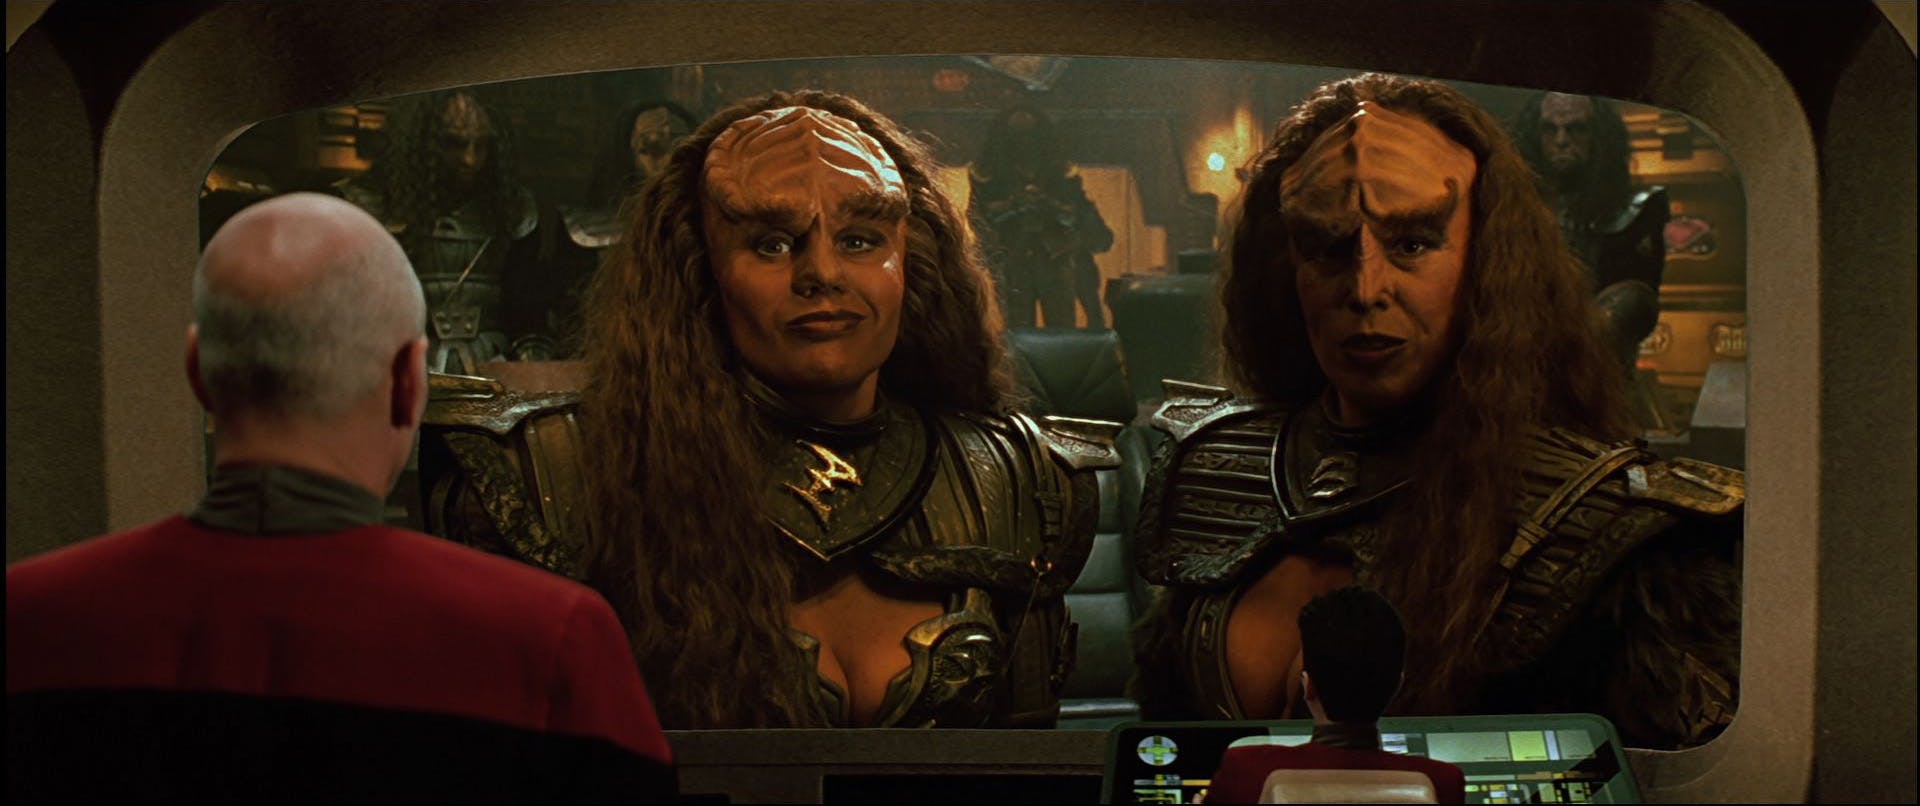 Picard communicates with Lursa and B'Etor Duras sisters on the viewscreen in 'Star Trek Generations'